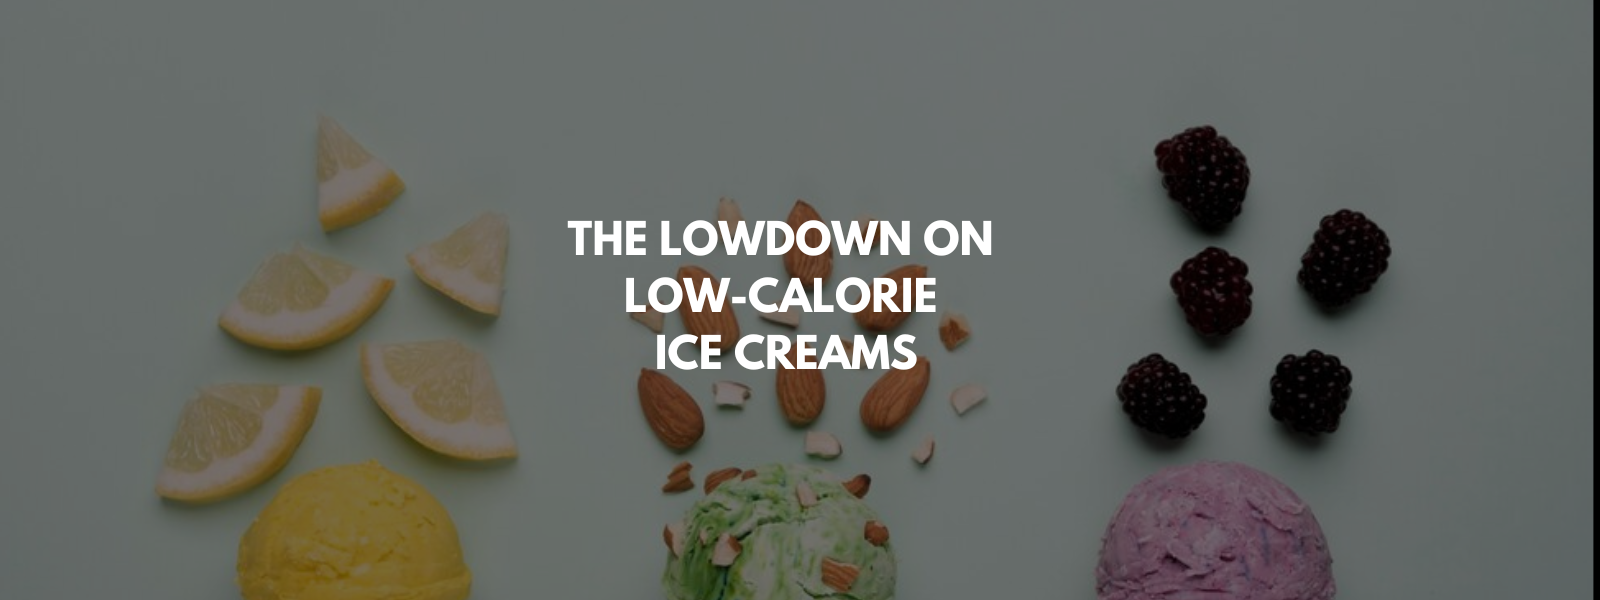 The Lowdown on Low-Calorie Ice Creams: Are They Really Better for You?